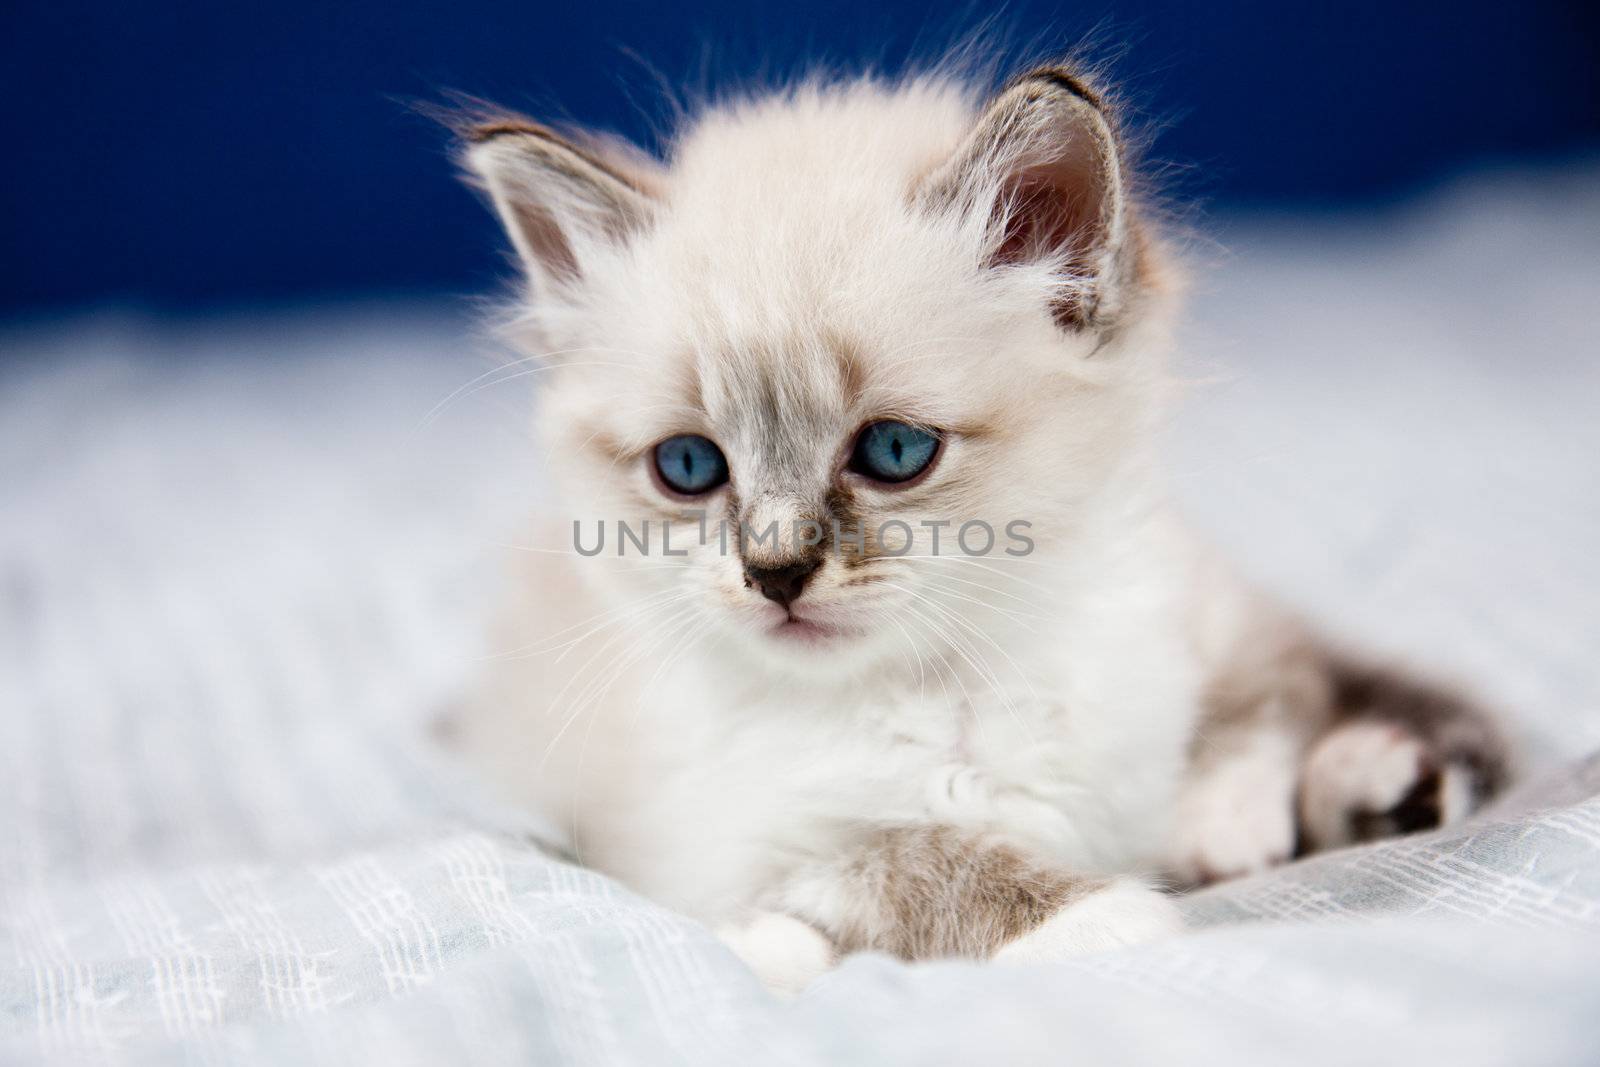 Portrait of a kitten with blue eyes by allg